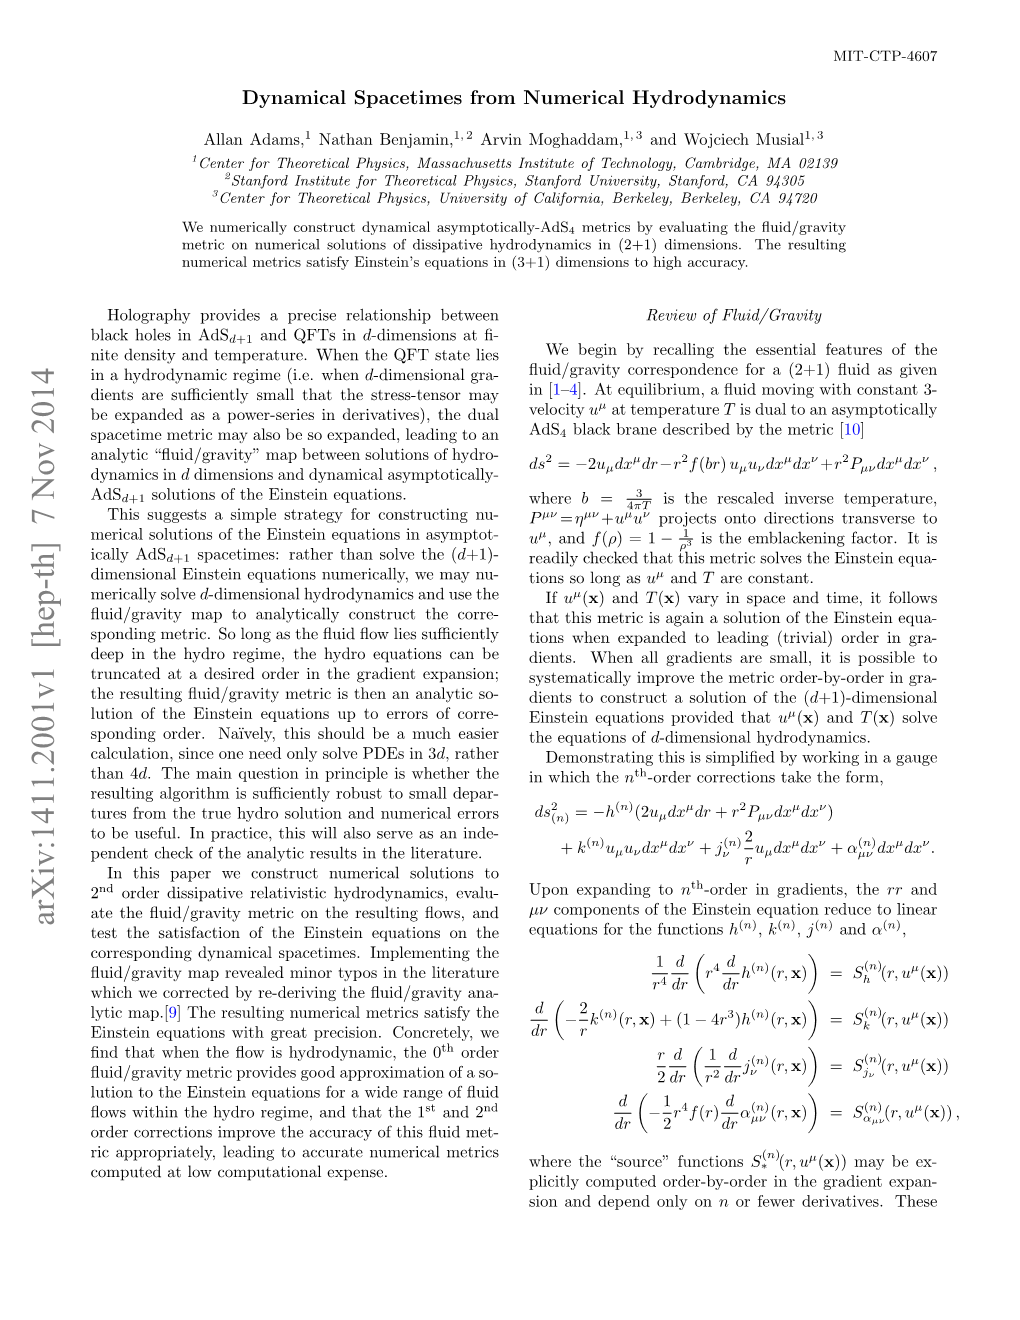 Dynamical Spacetimes from Numerical Hydrodynamics